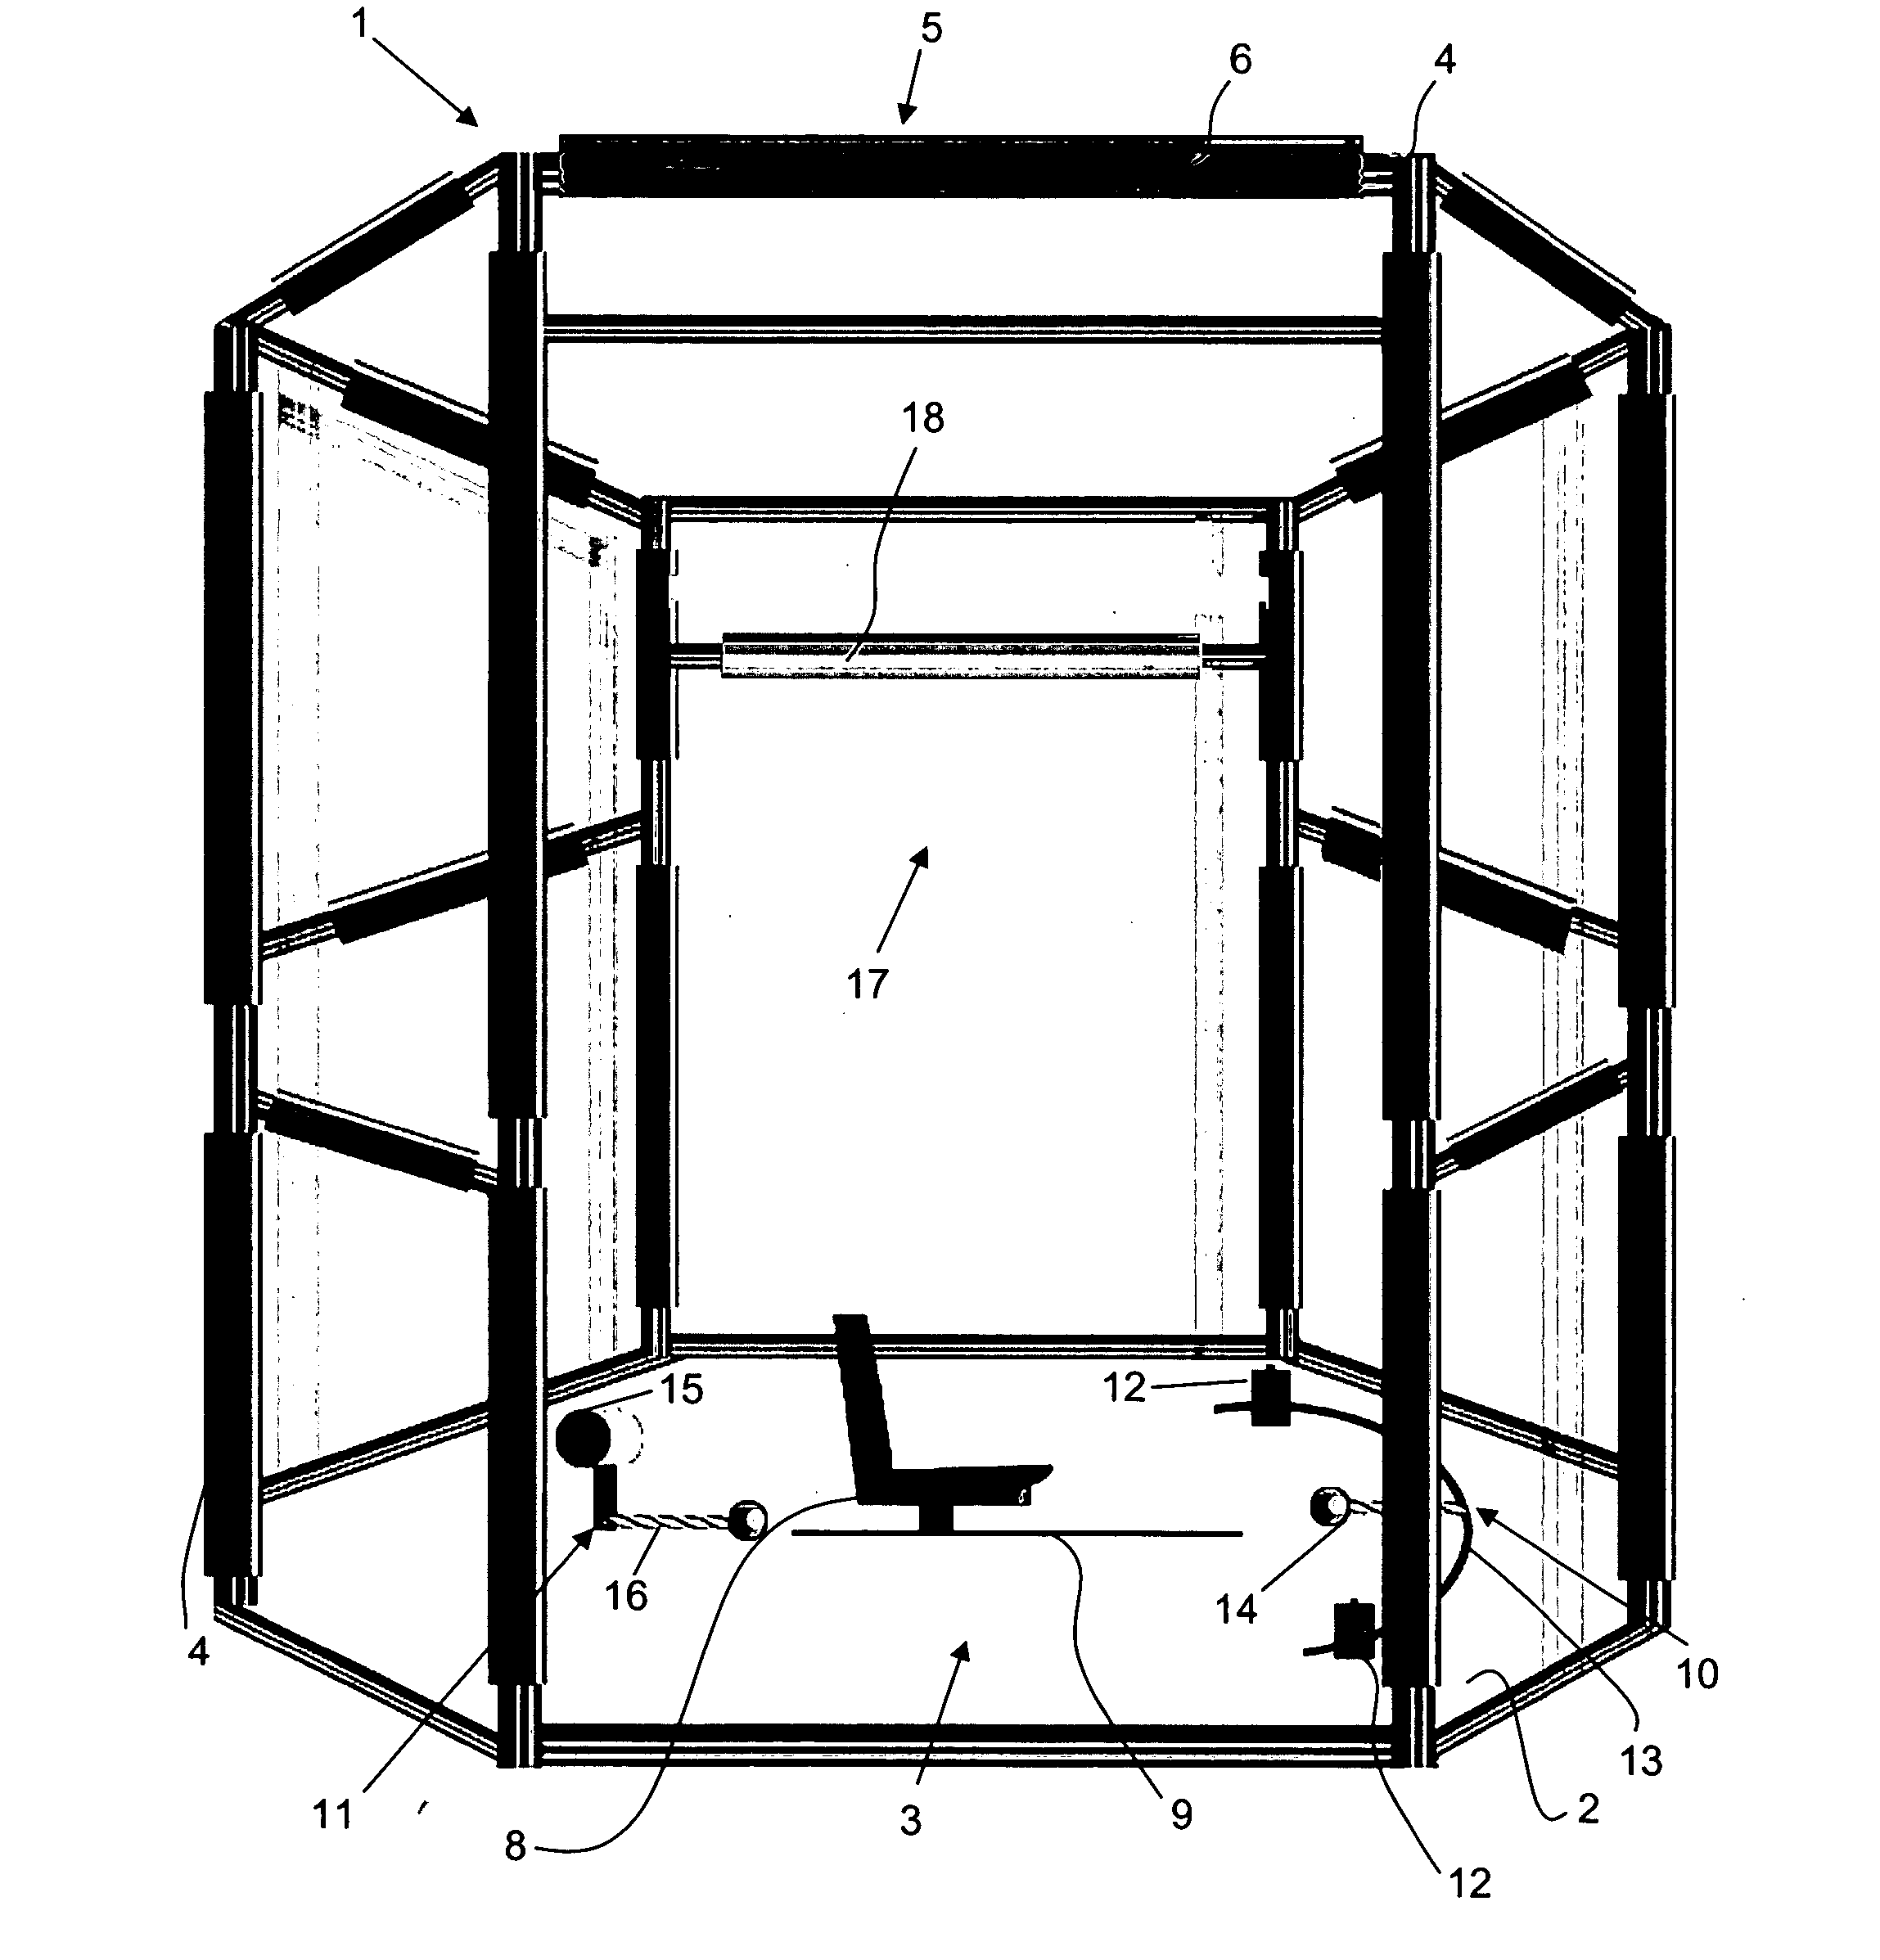 Apparatus for fitness stretching